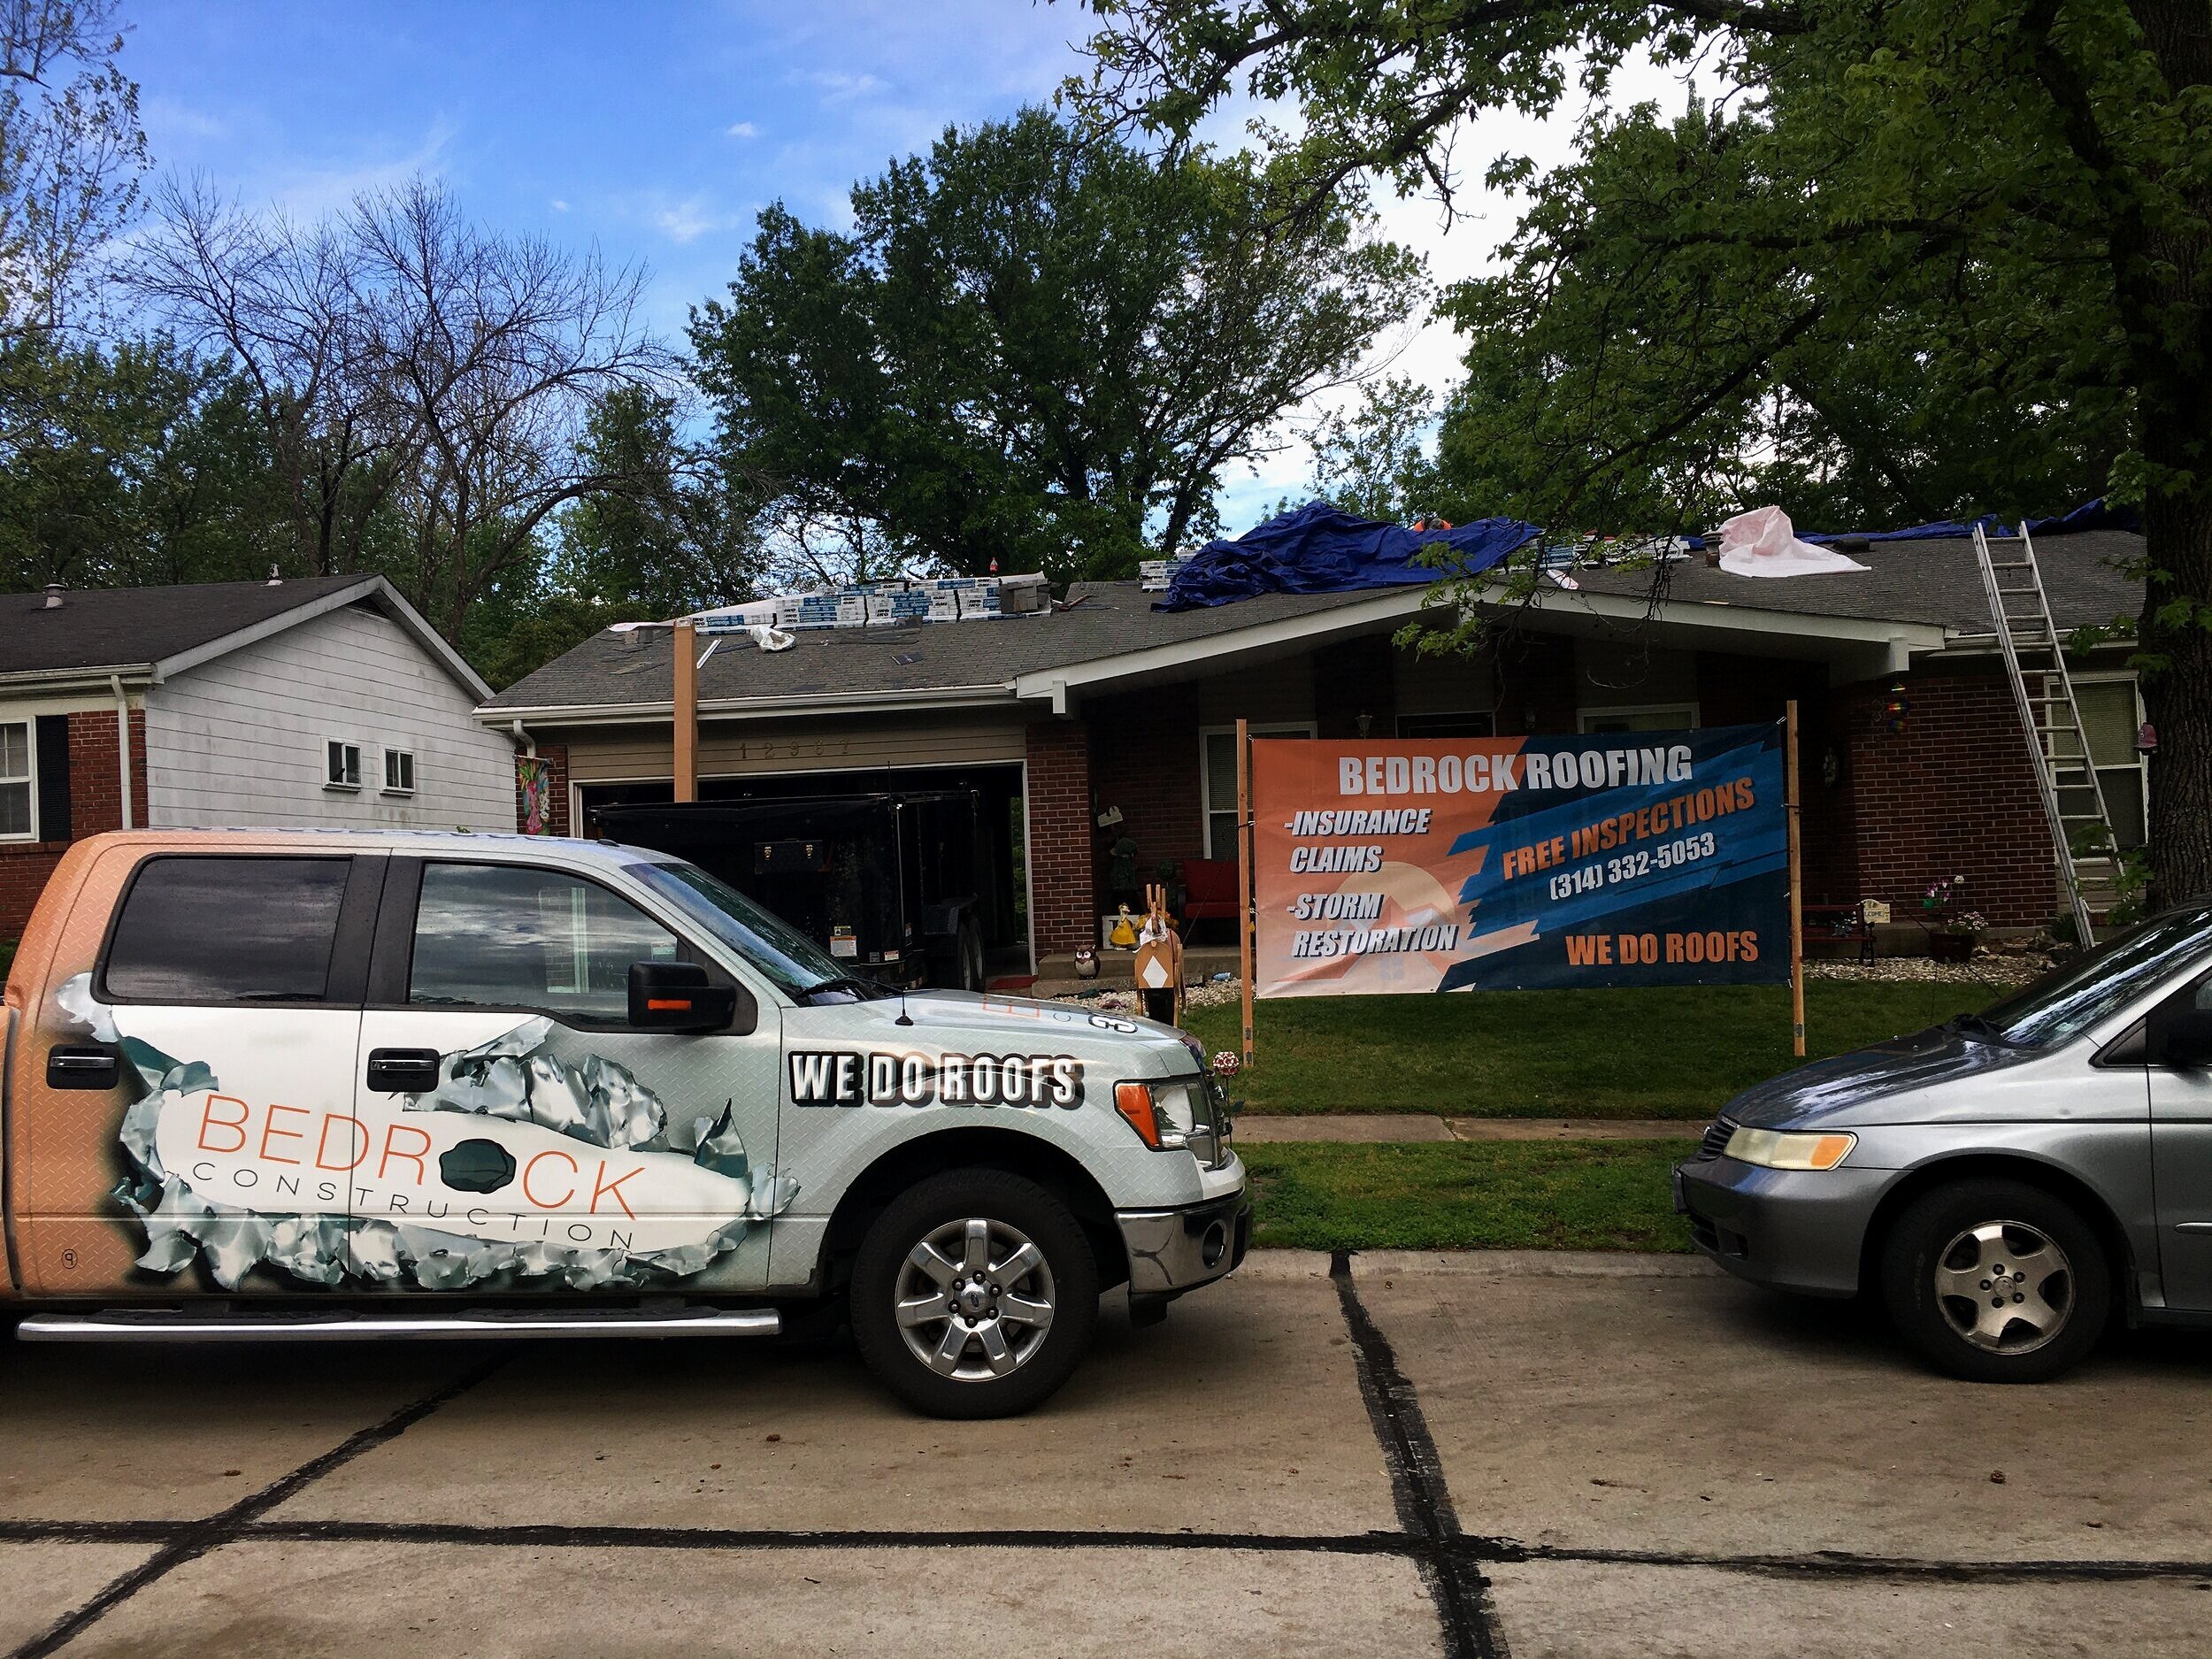 ST. LOUIS' PREMIER HUB FOR ROOF REPLACEMENT